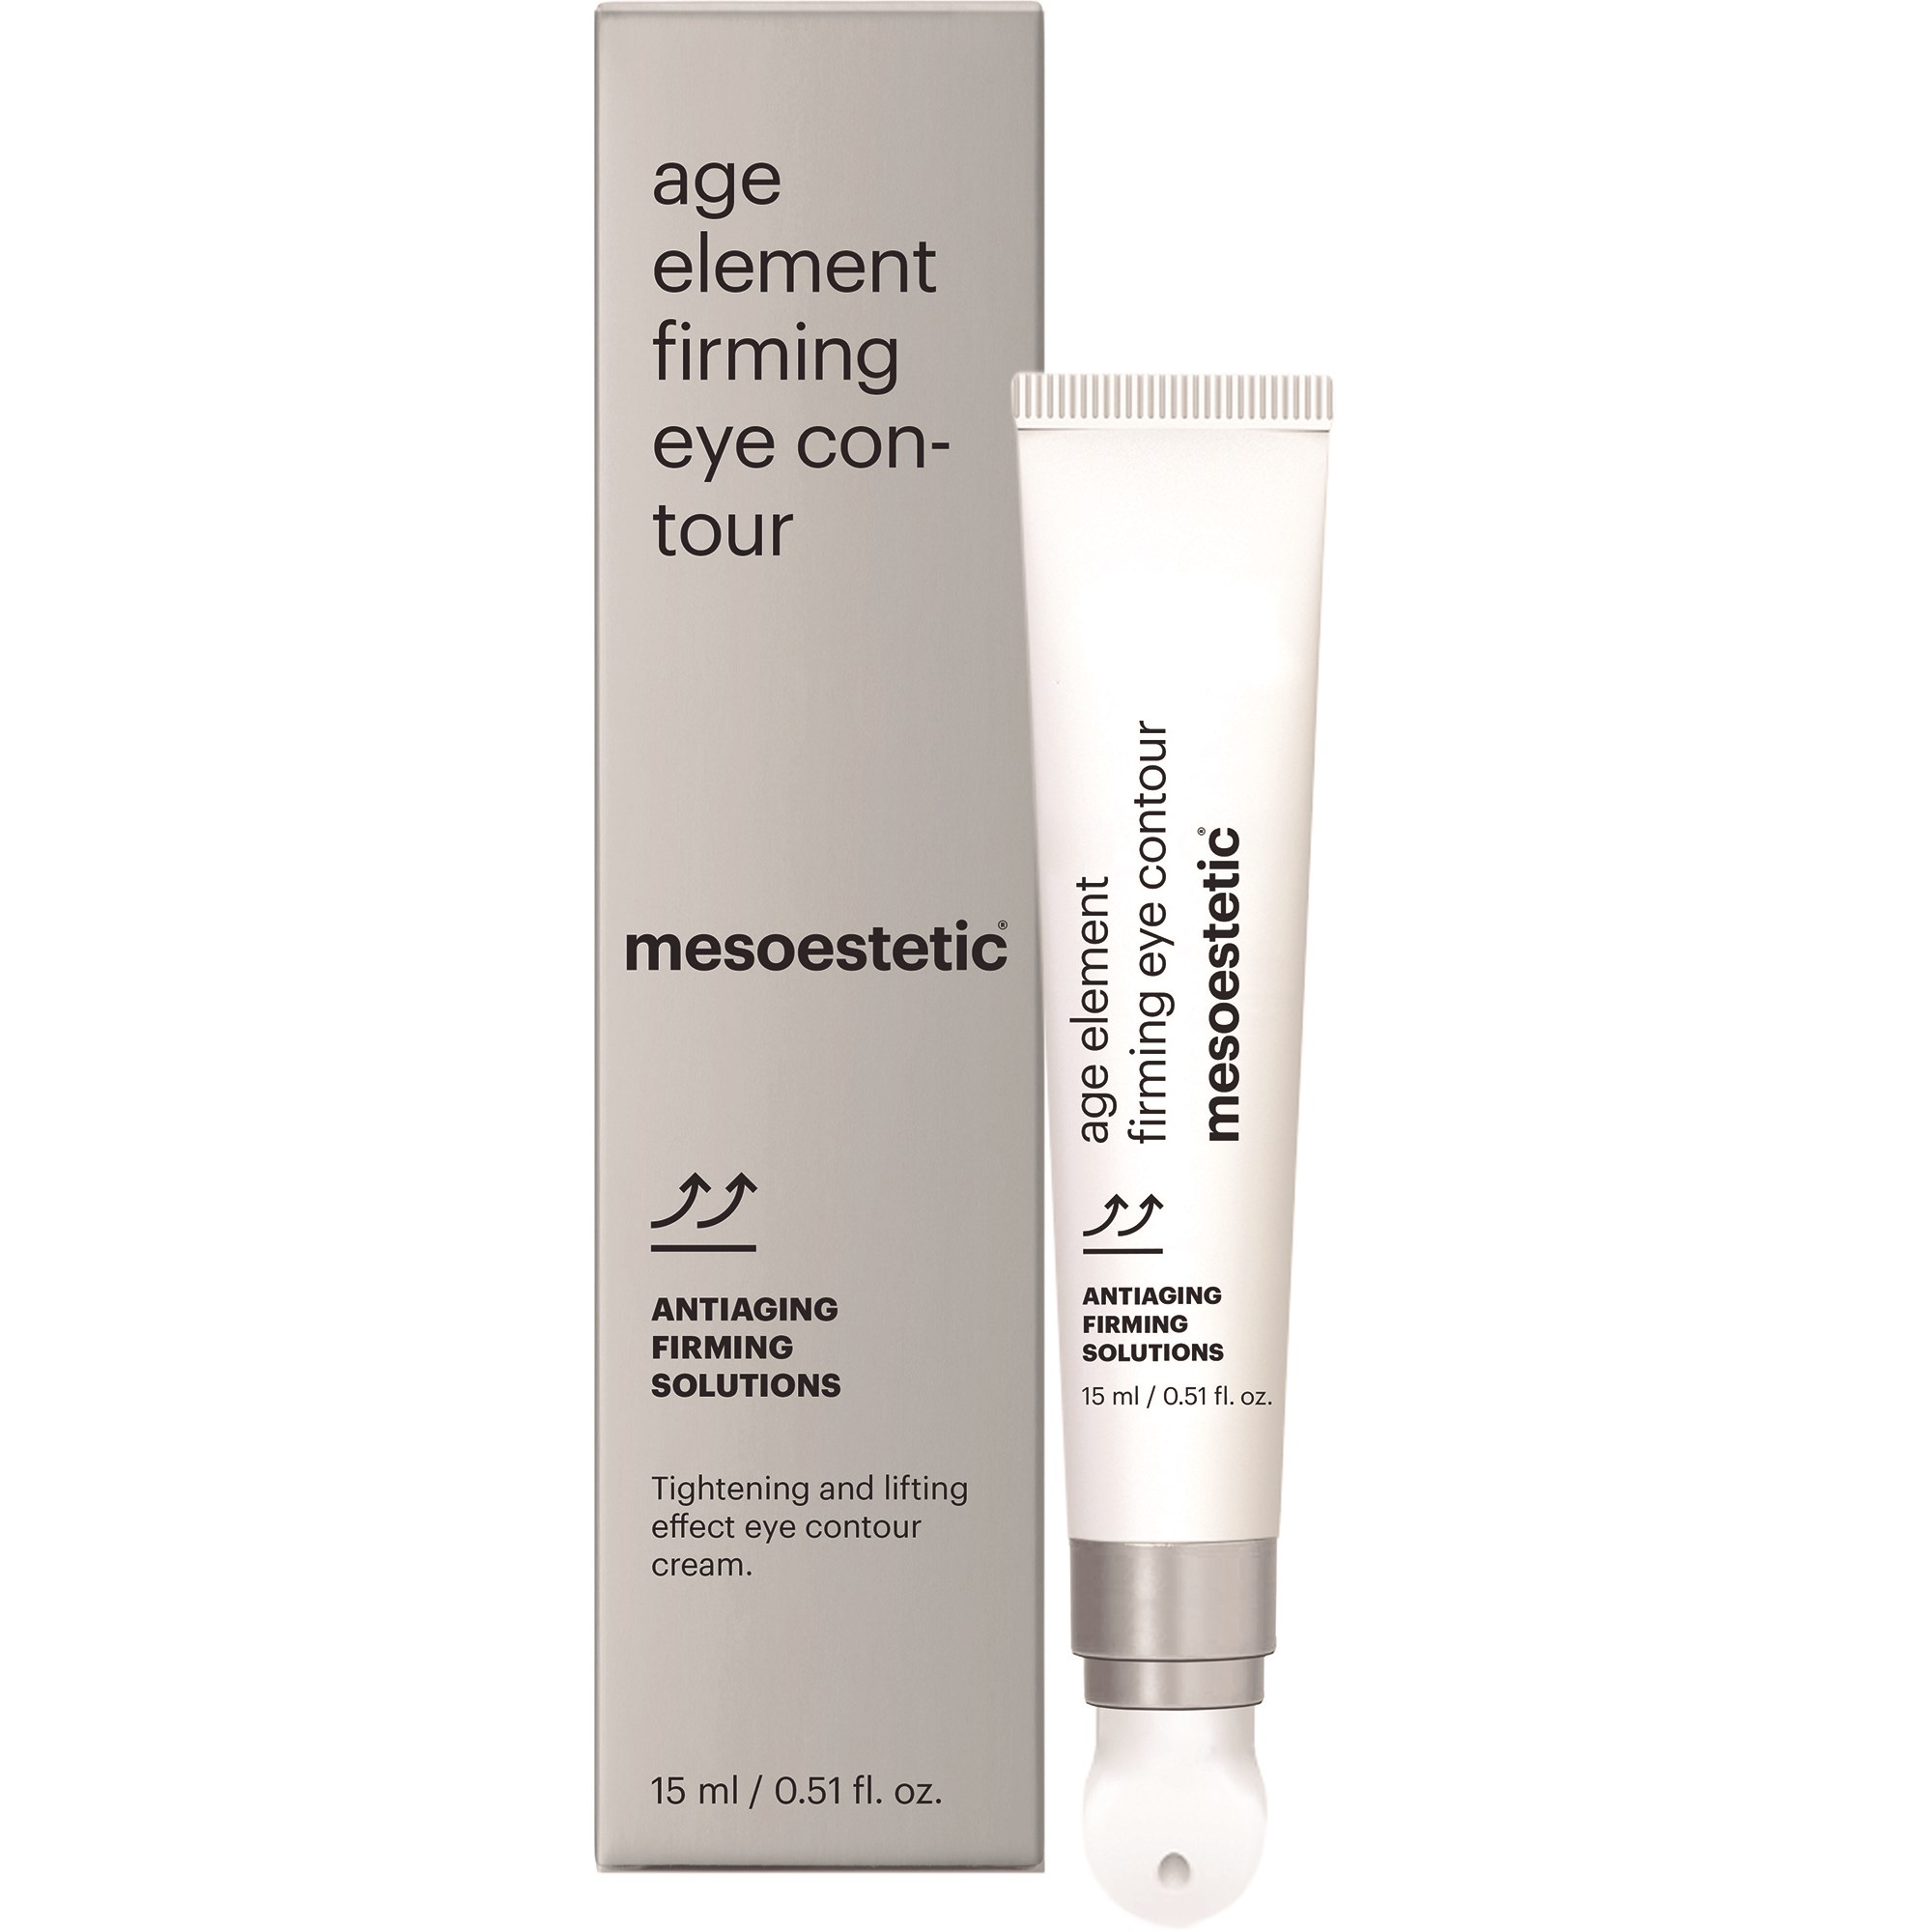 Läs mer om Mesoestetic Age Element Solutions Firming Eye Contour